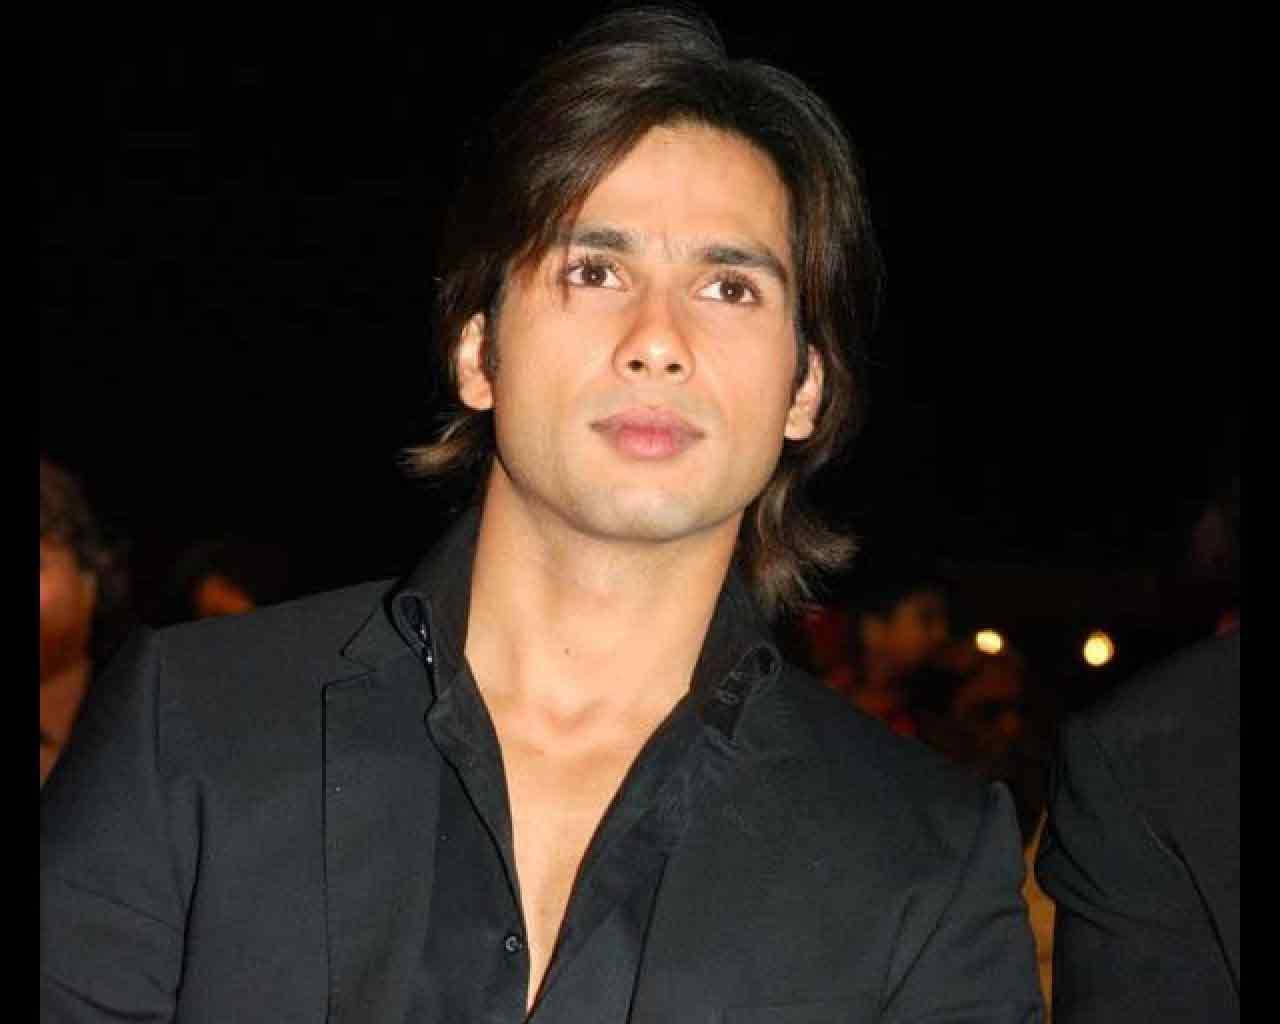 Long-haired Shahid Kapoor